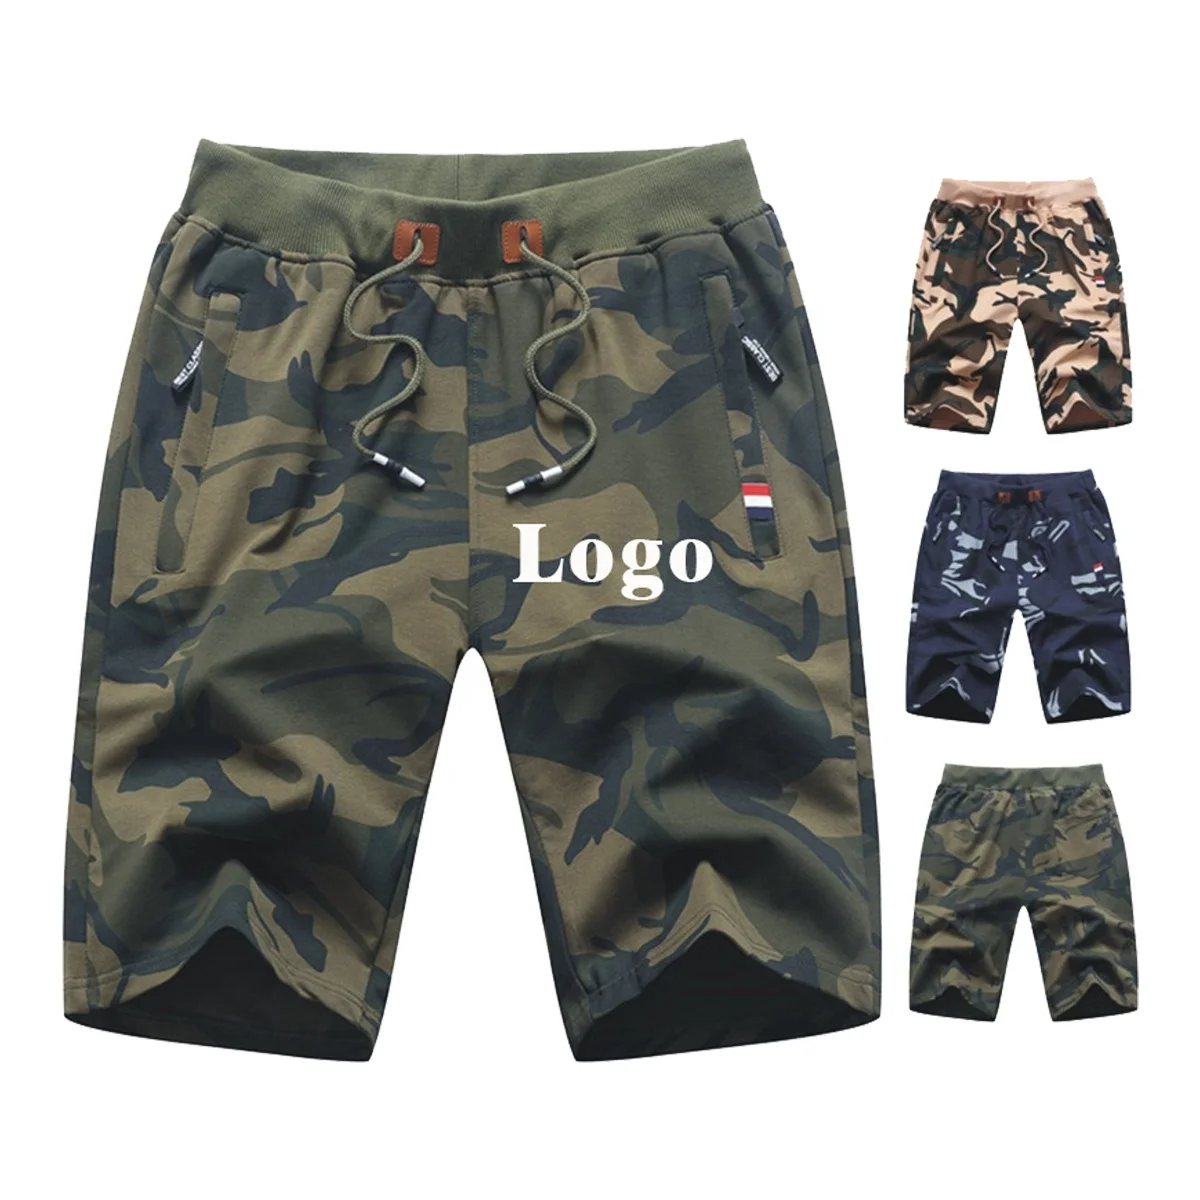 

JS641 summer big and tall clothing cotton cozy camouflage printed pocket casual biker jogger high waisted plus size men's shorts, As shown